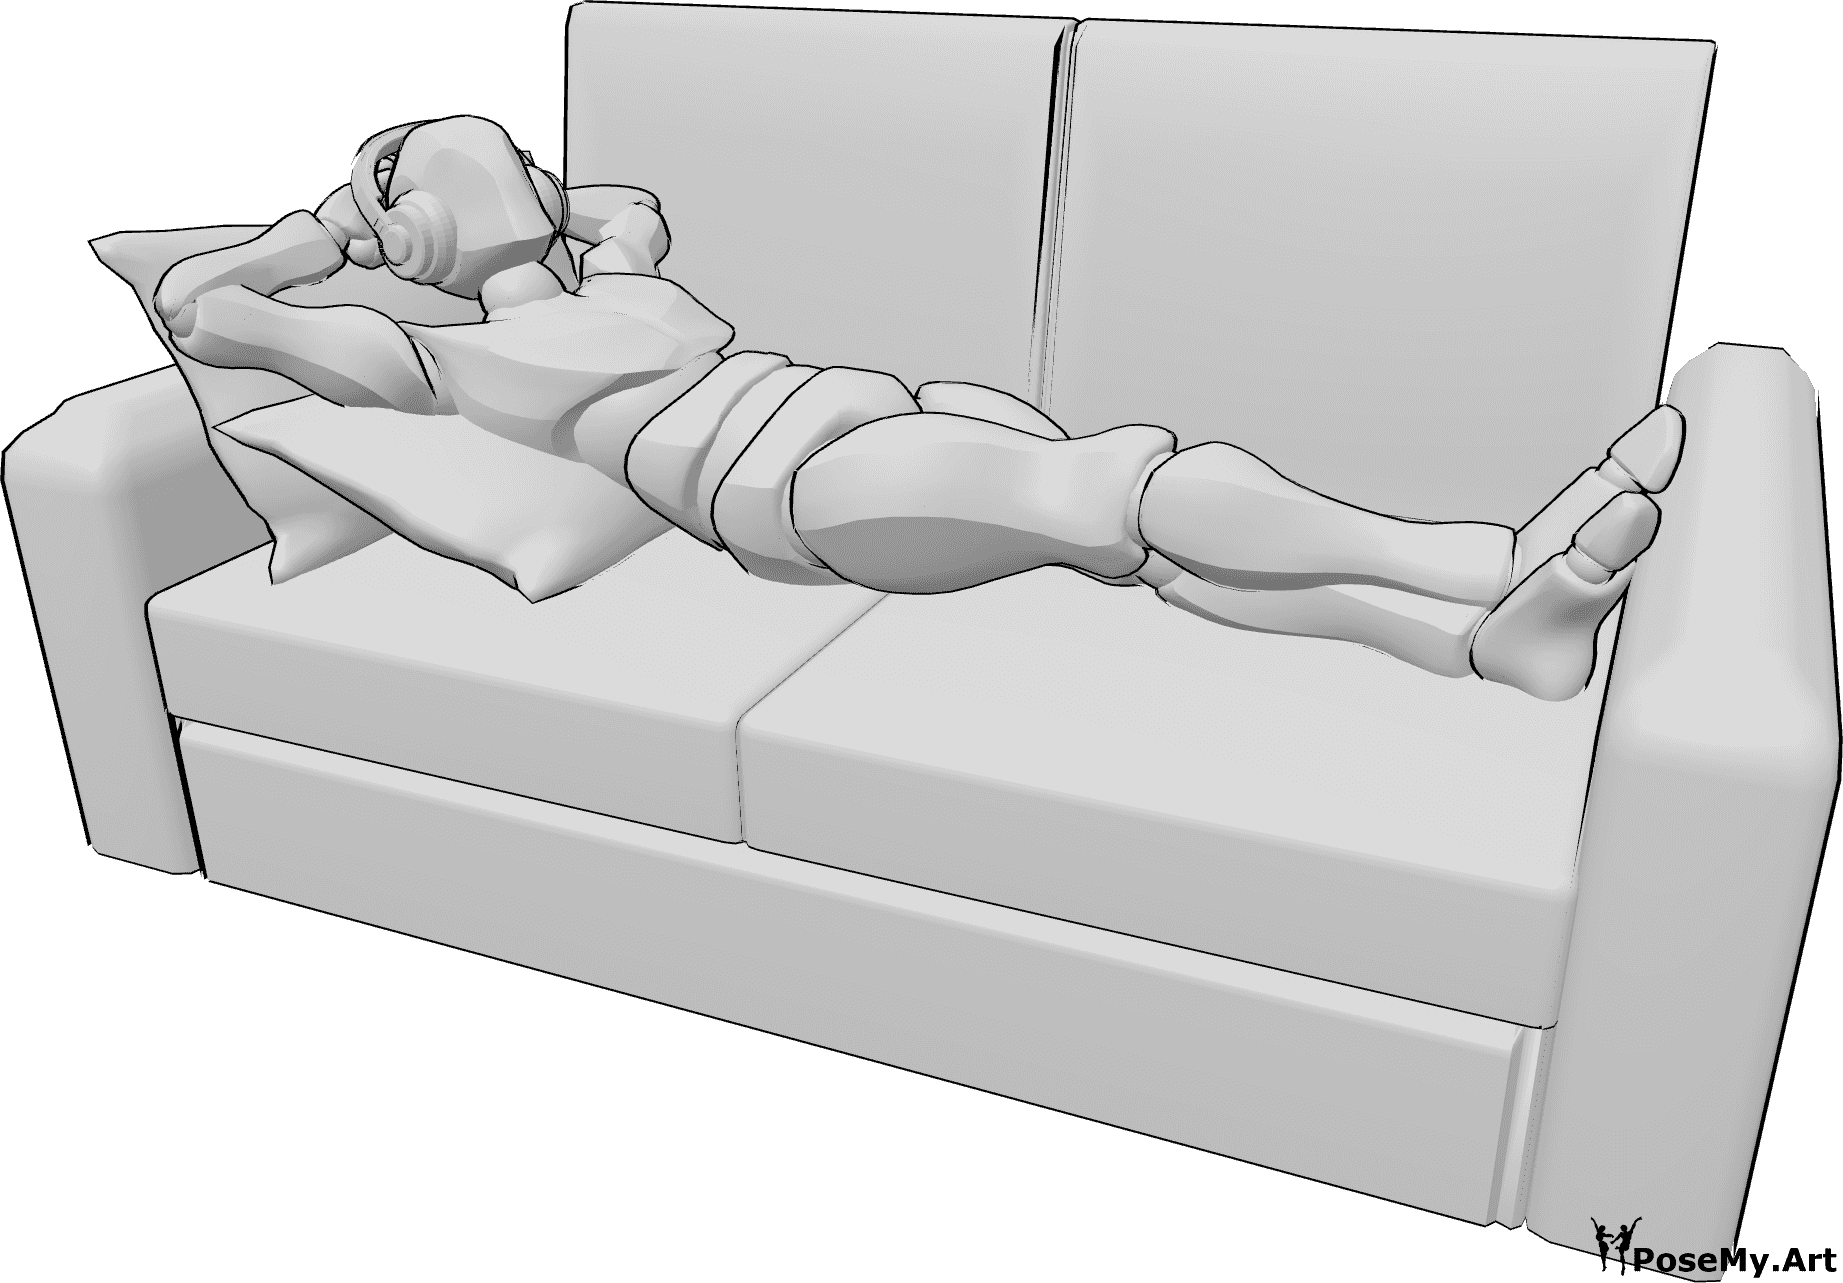 Pose Reference- Male lying headphones pose - Male is lying comfortably on the couch and listening to music on headphones